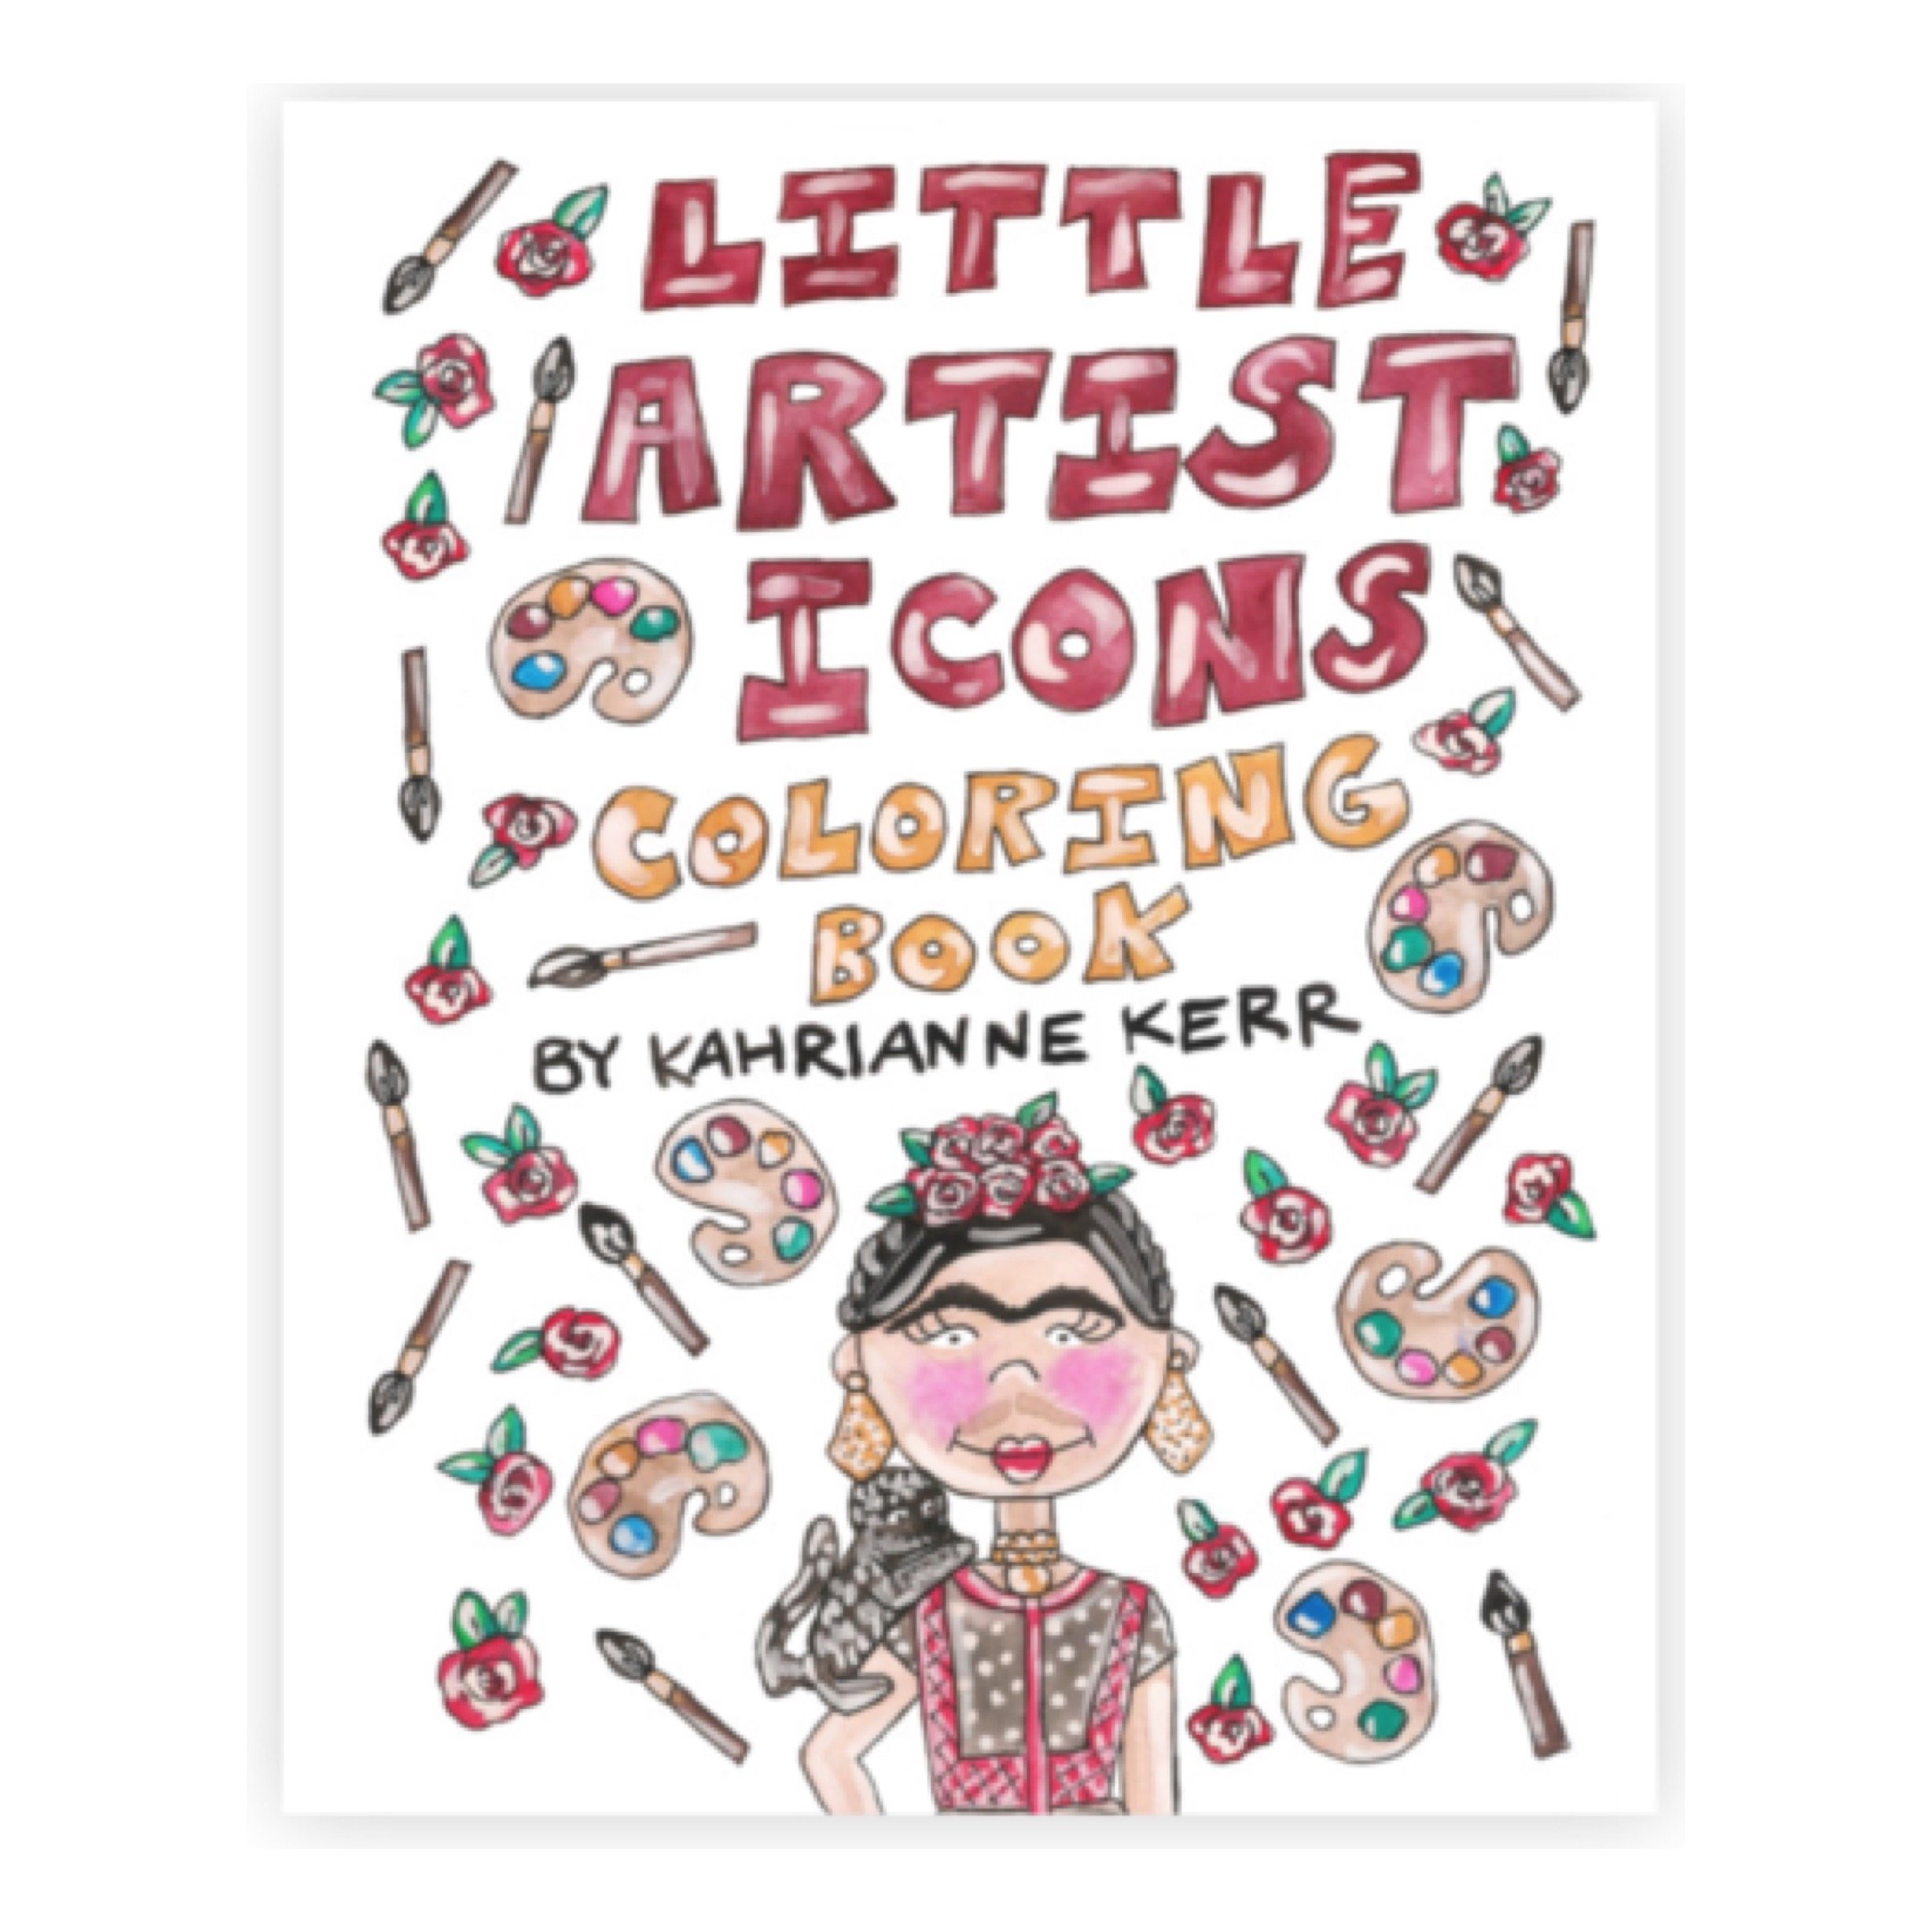 $19.99 LITTLE ARTIST ICONS ADULT COLORING BOOK